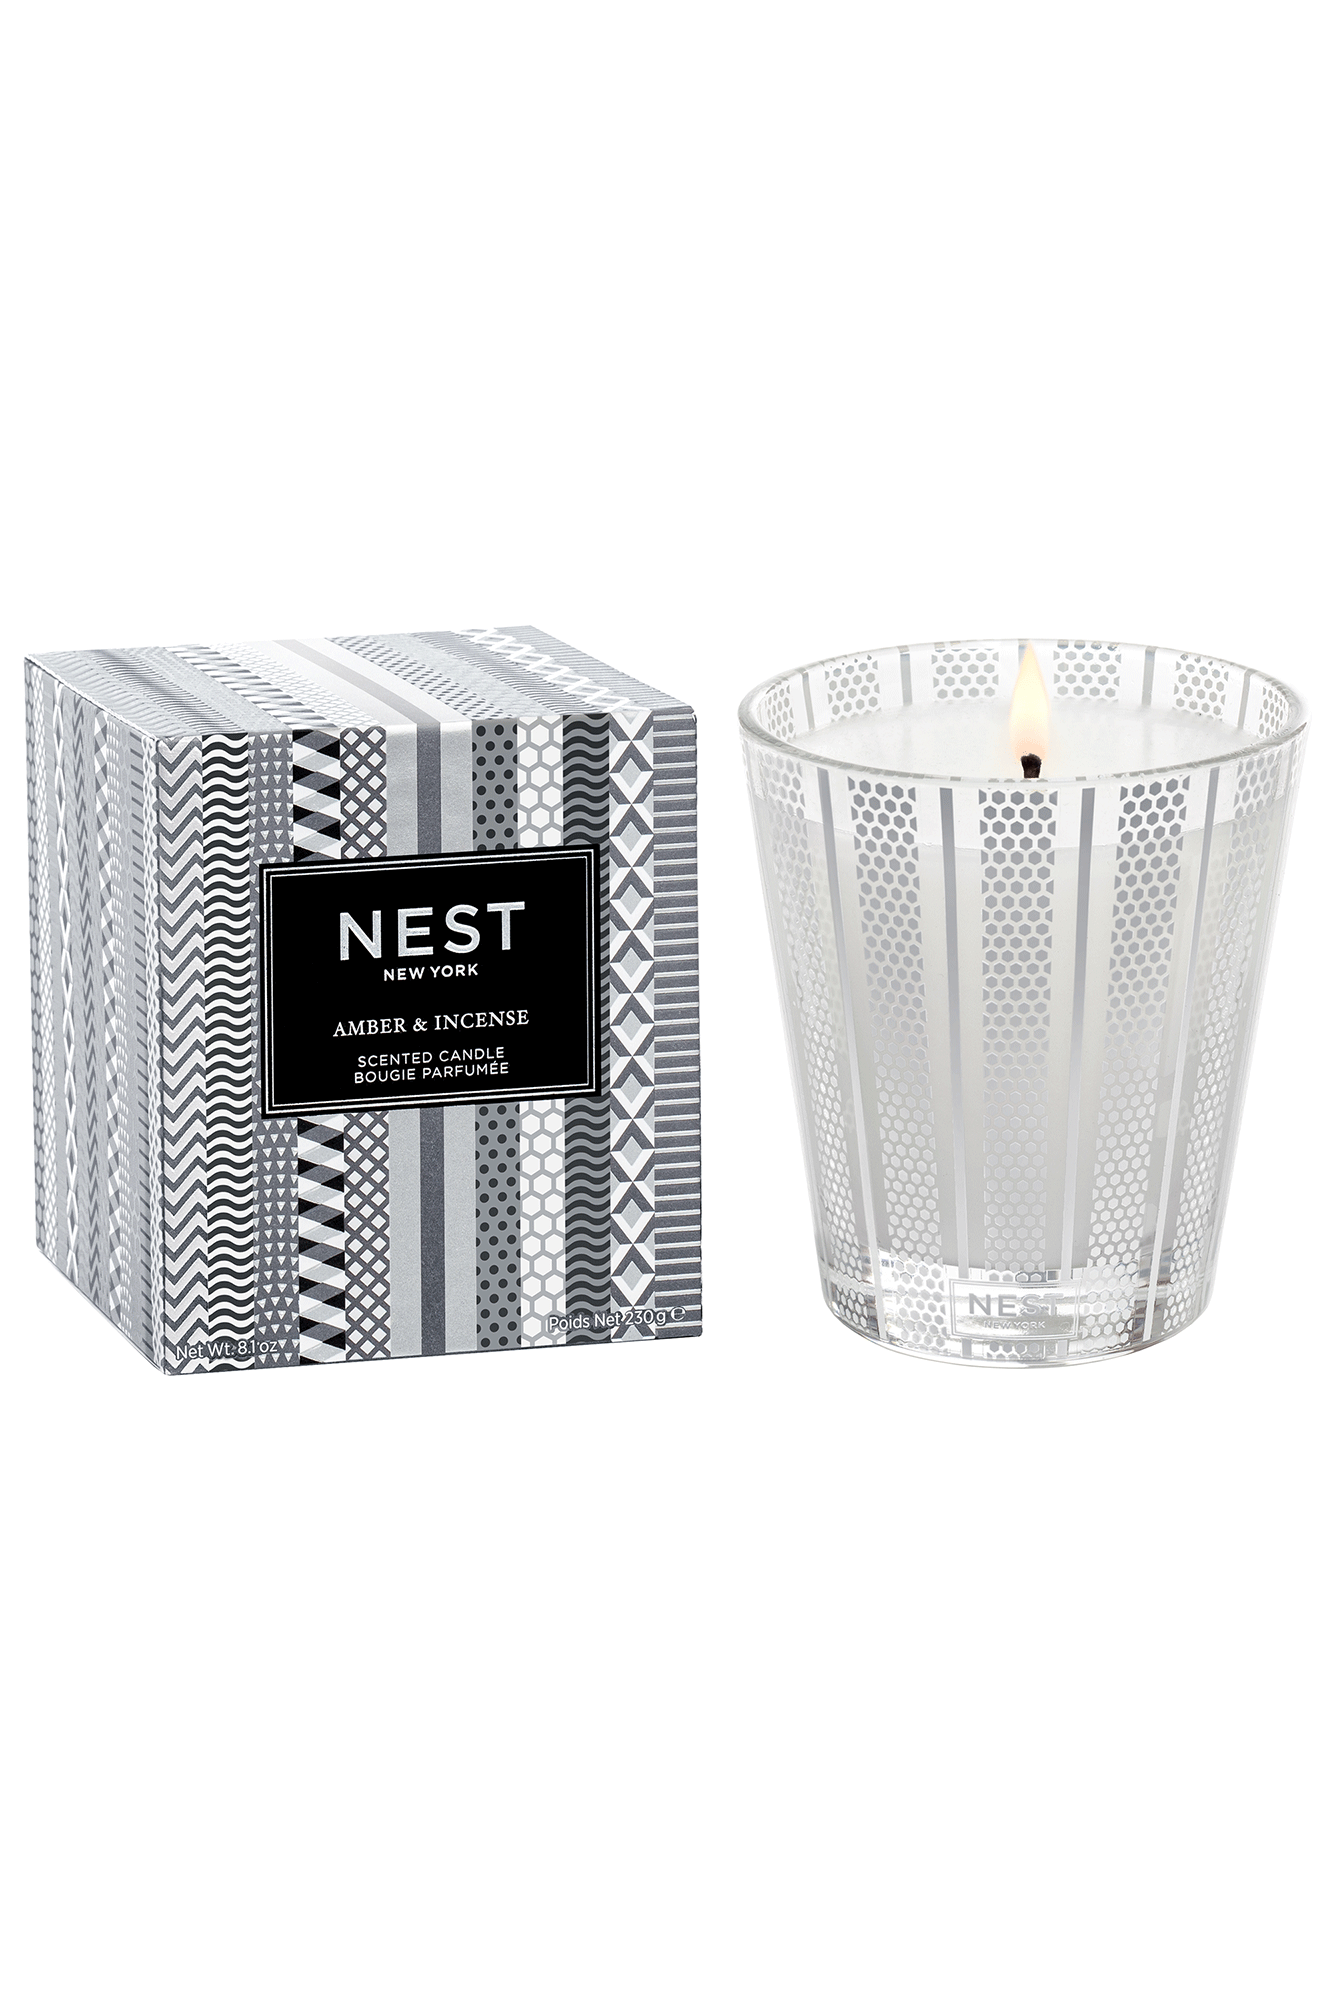 This Amber & Incense Classic Candle from Nest is perfect for experiencing the richness of amber, frankincense, and cedar. Its blend of complex fragrances creates a tranquil atmosphere, making it perfect for peace and relaxation.